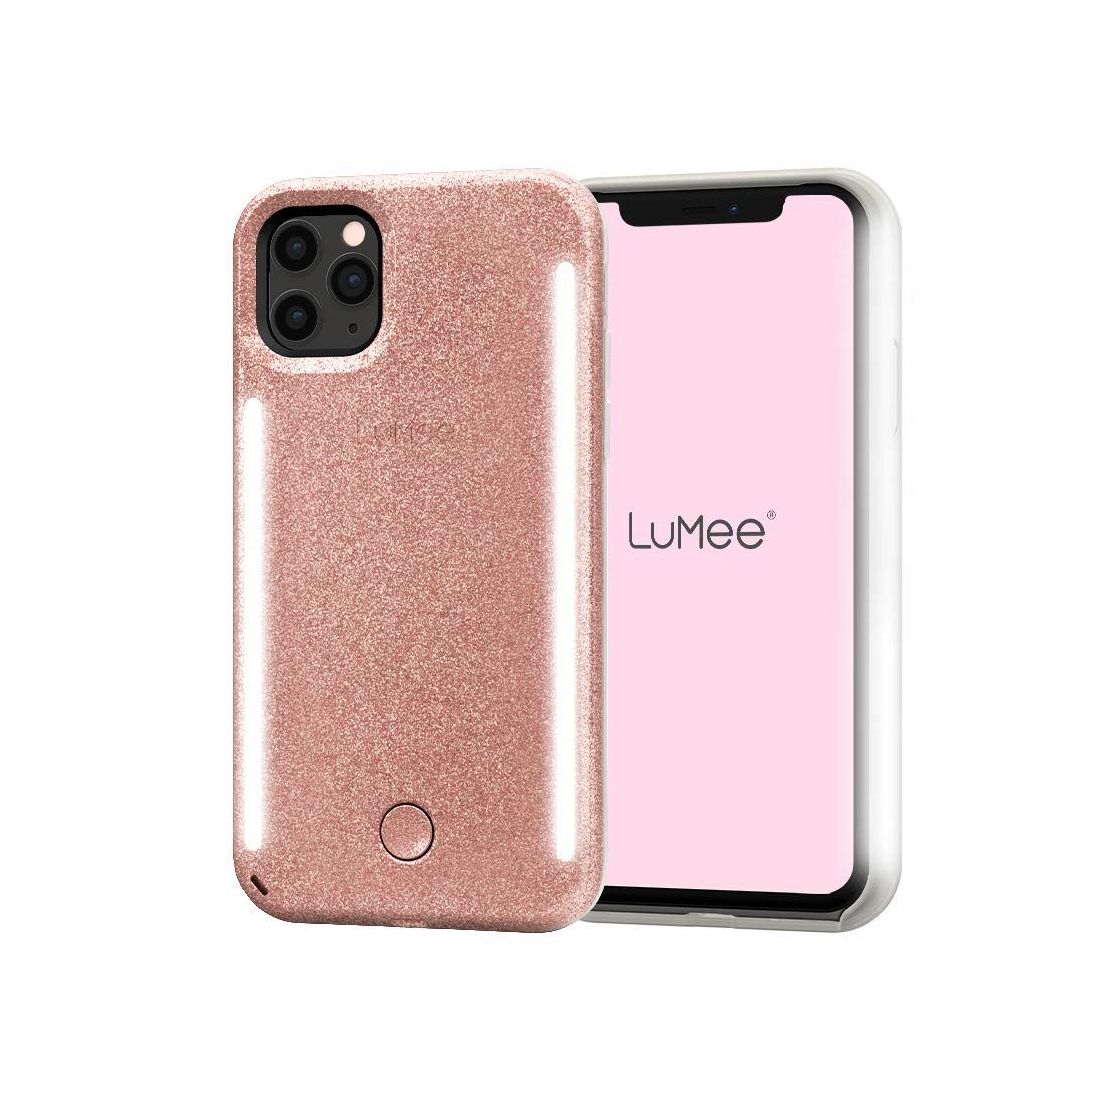 Lumee Duo Case Rose Glitter for iPhone 11 Pro Max